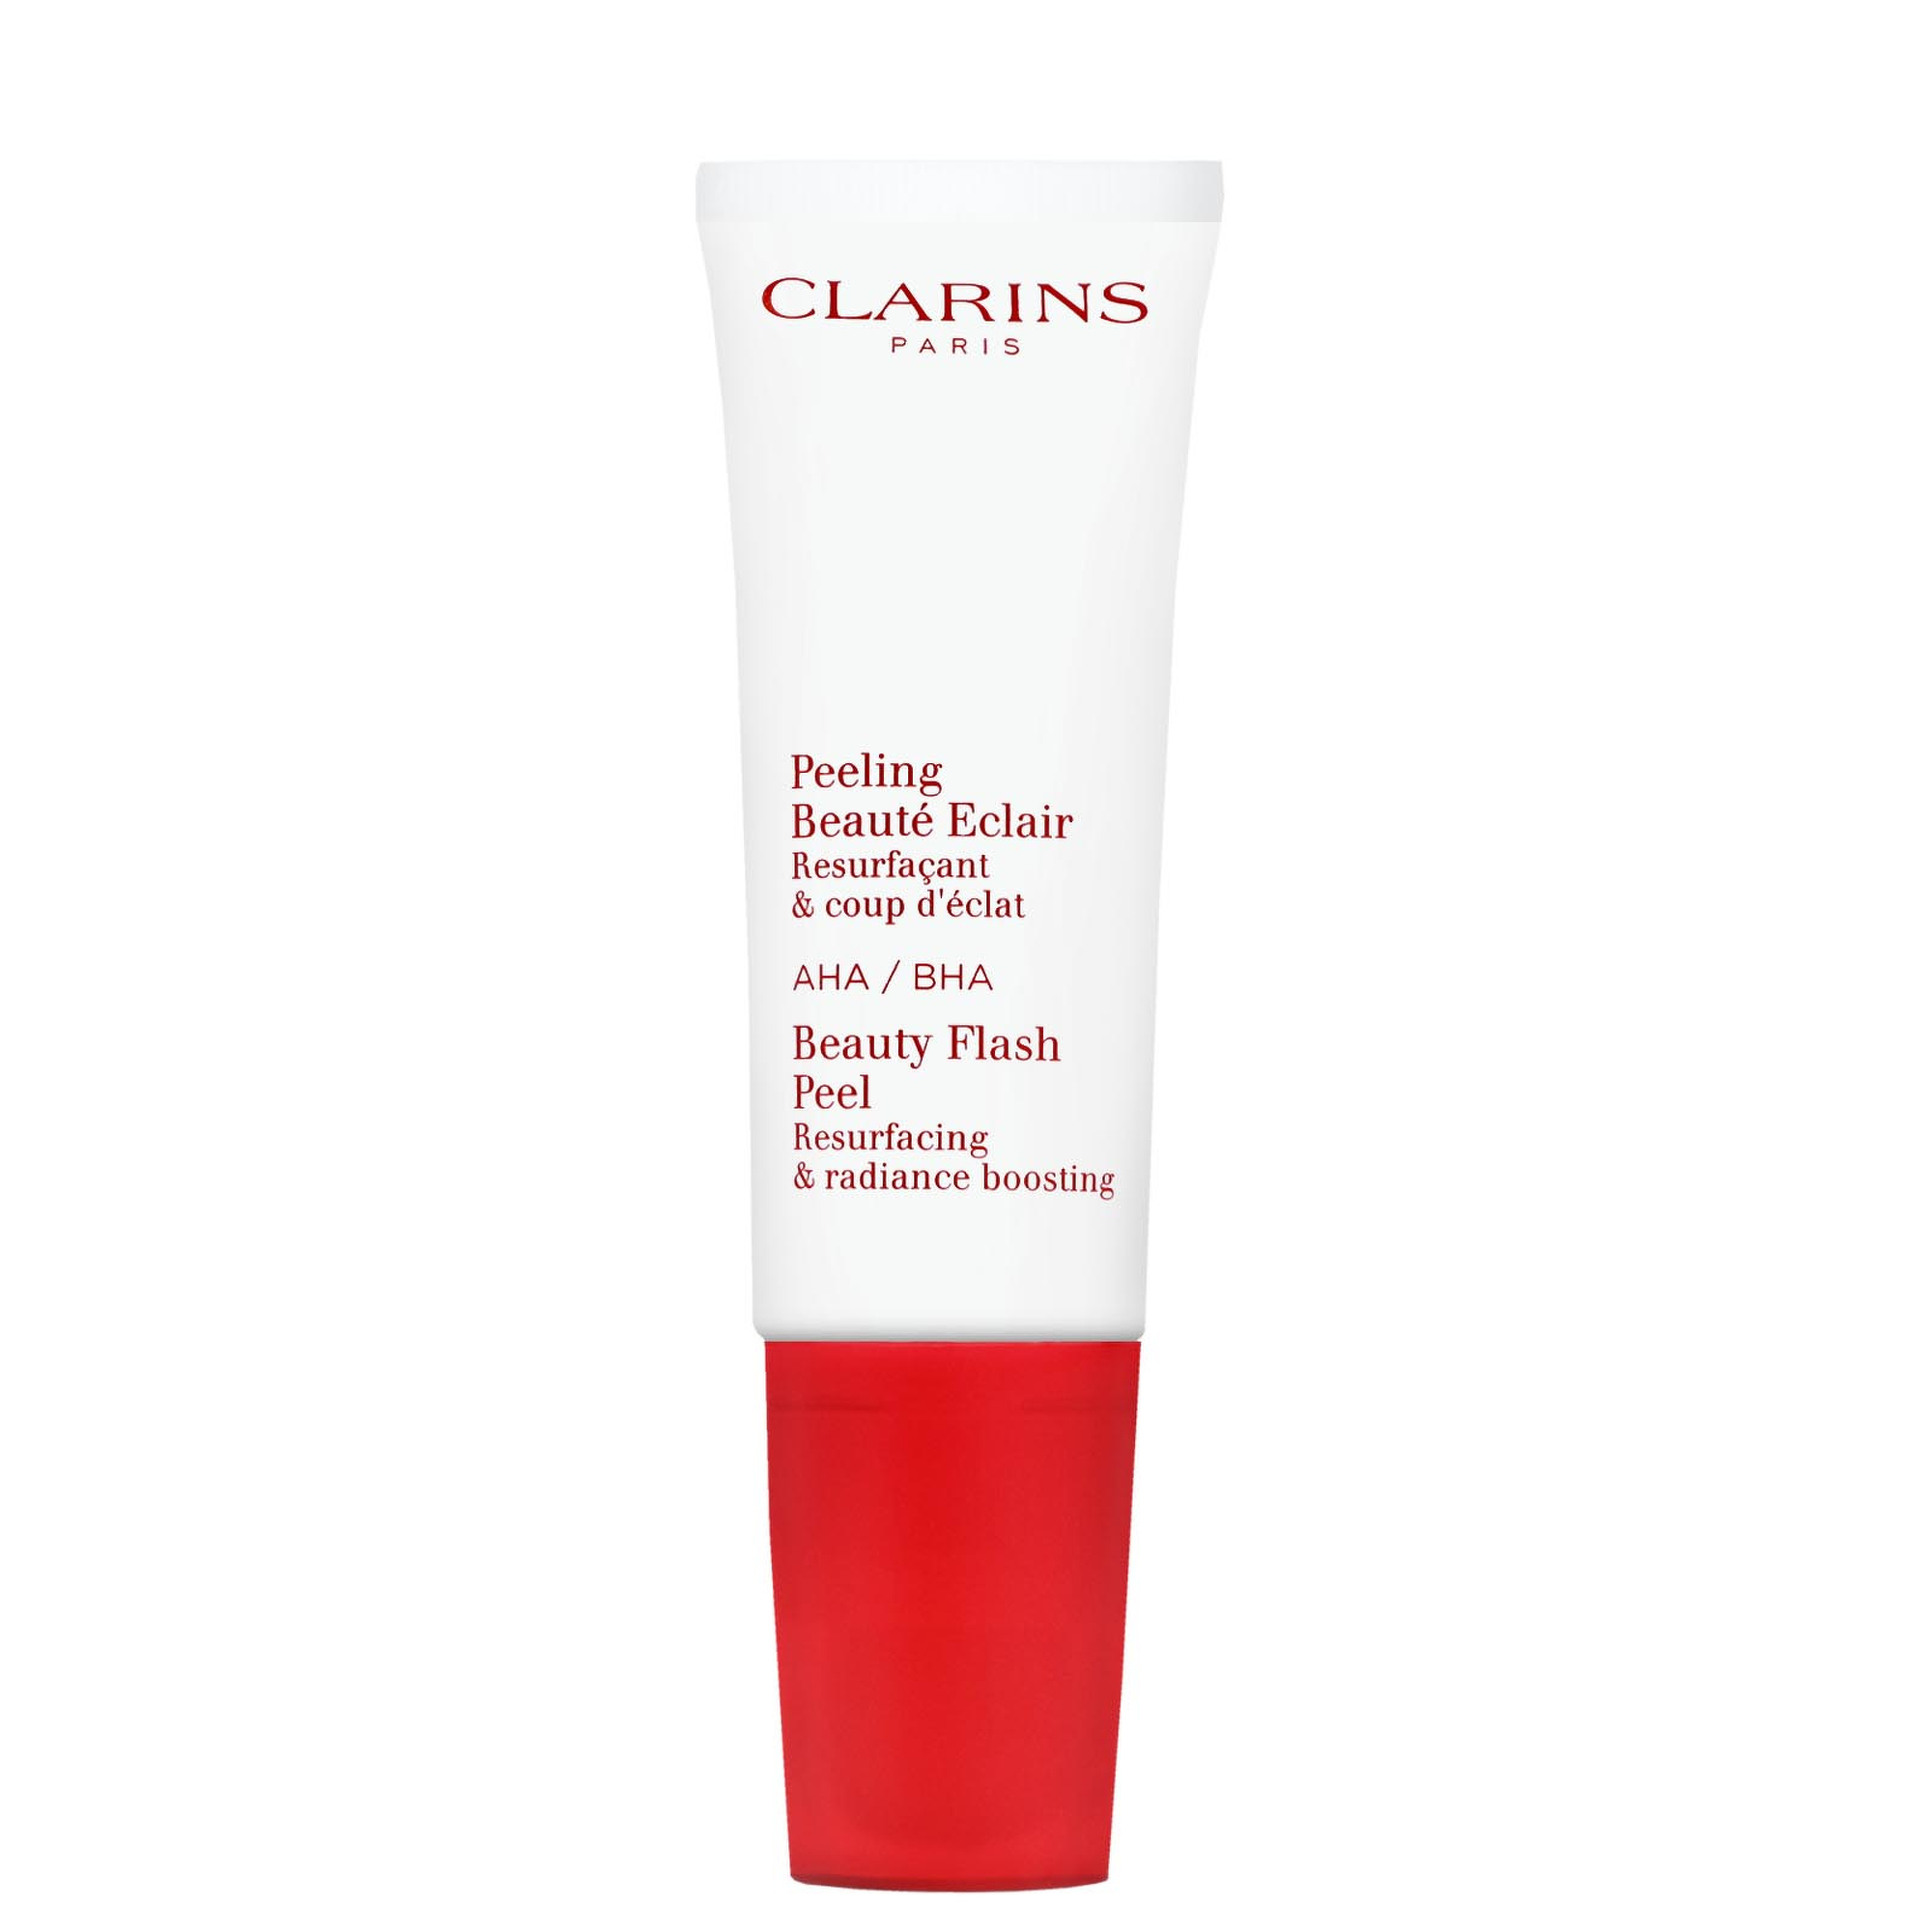 Photos - Facial / Body Cleansing Product Clarins Exfoliators & Masks Beauty Flash Peel 50ml 